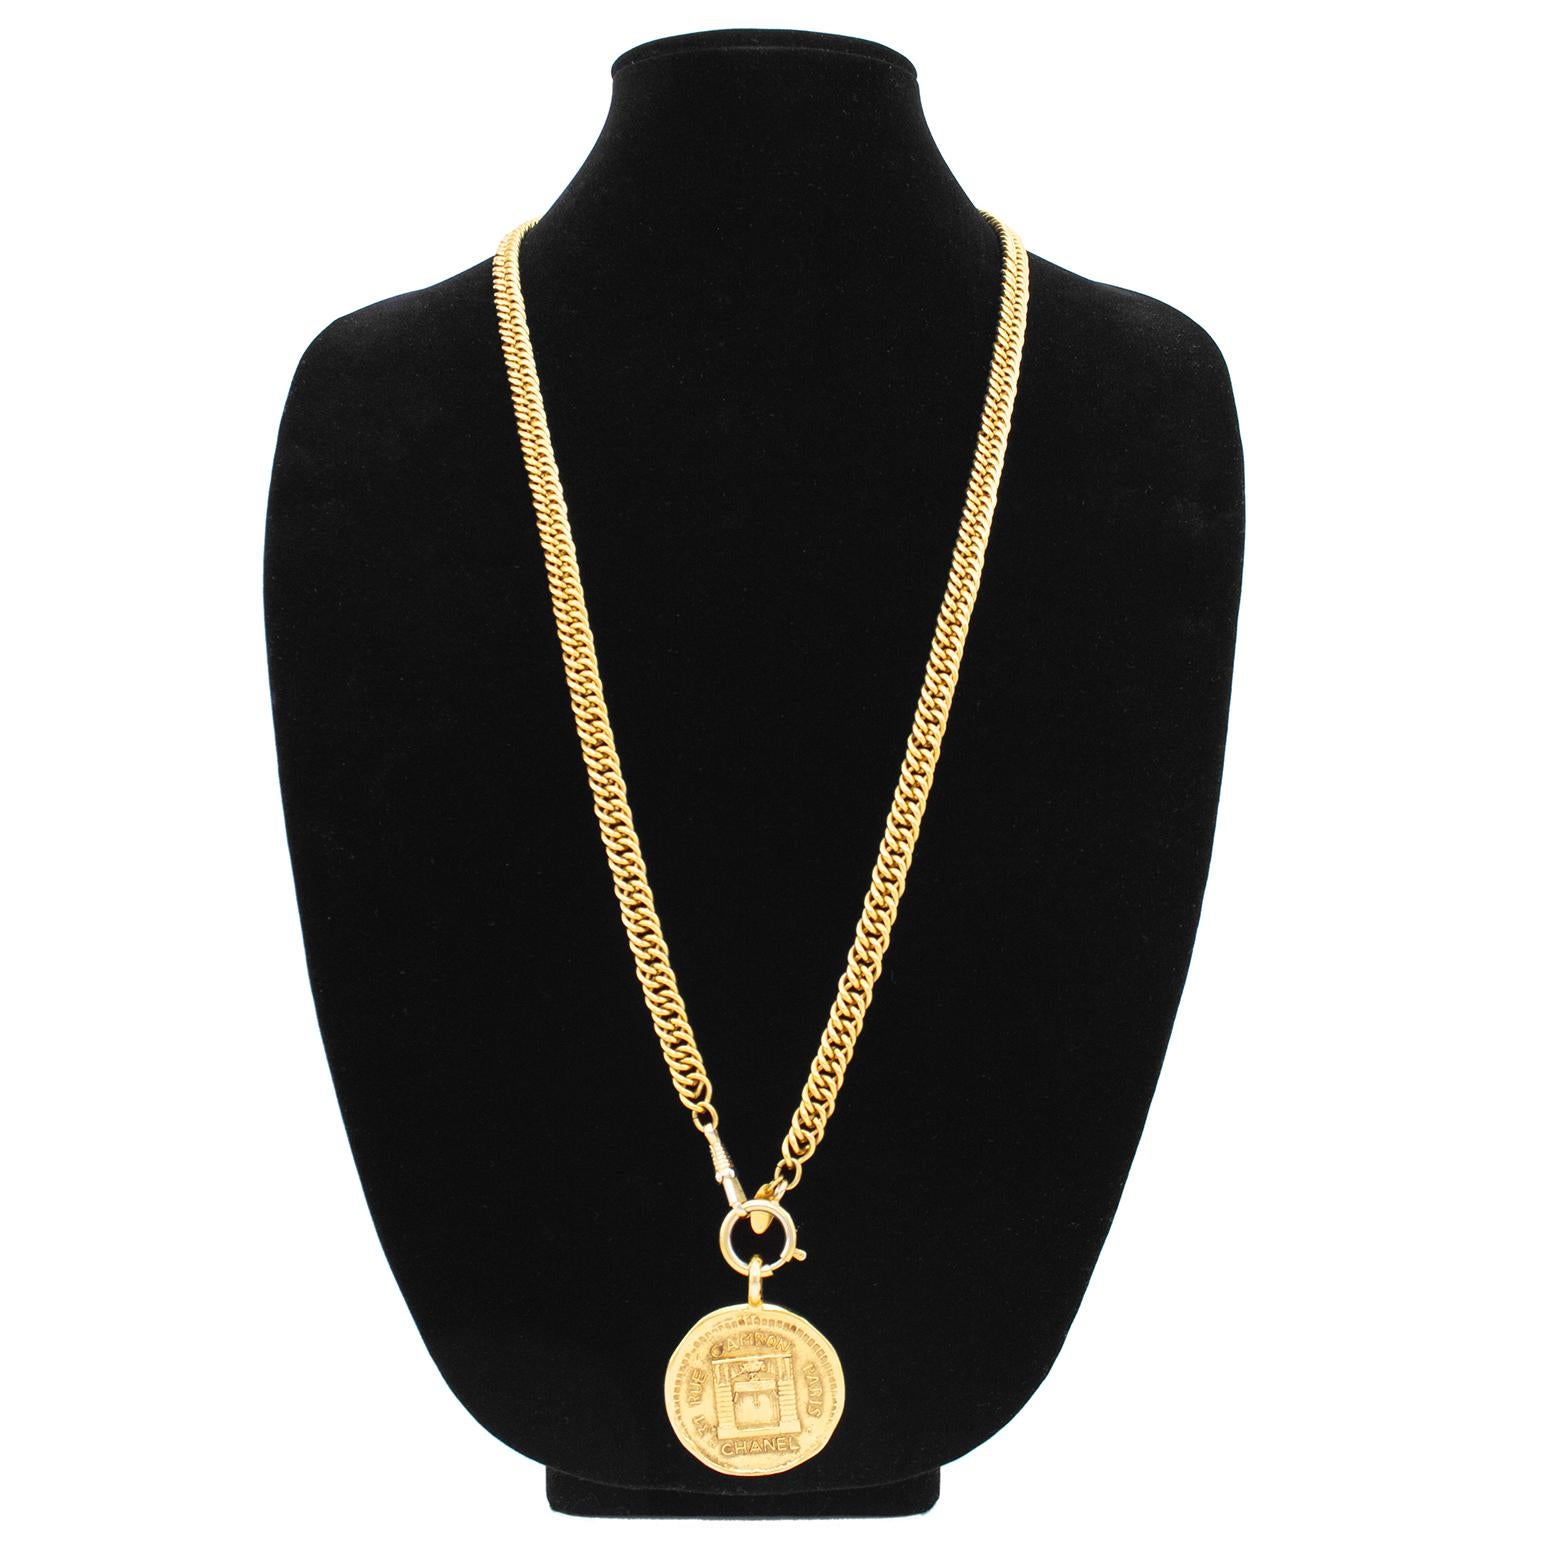 1980s Chanel gold tone metal single strand chainlink necklace with a medallion pendant measuring 1.5